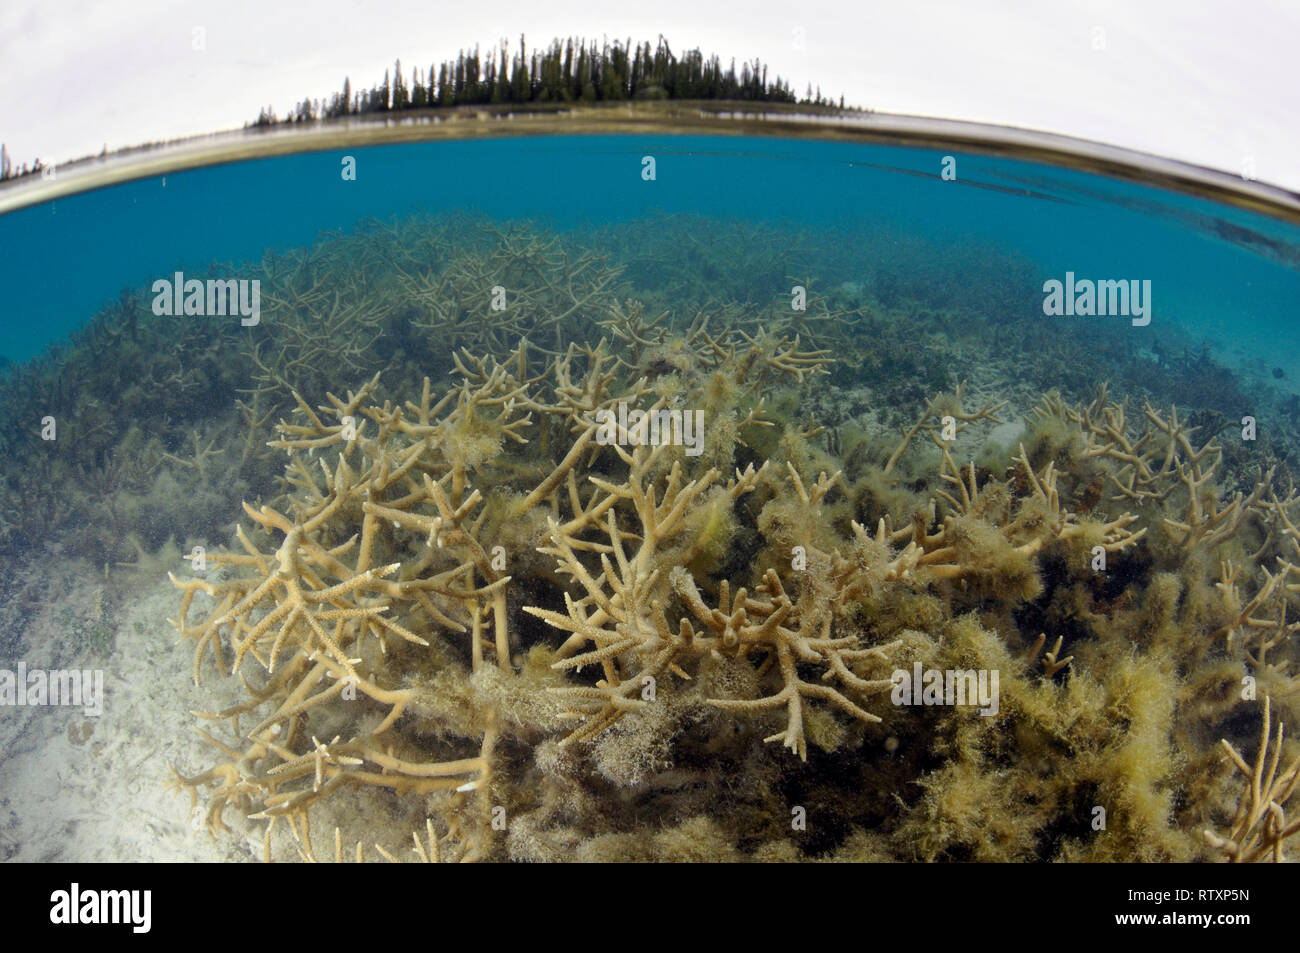 Staghorn coral, Acropora sp., Iles des Pins, New Caledonia, South Pacific Stock Photo